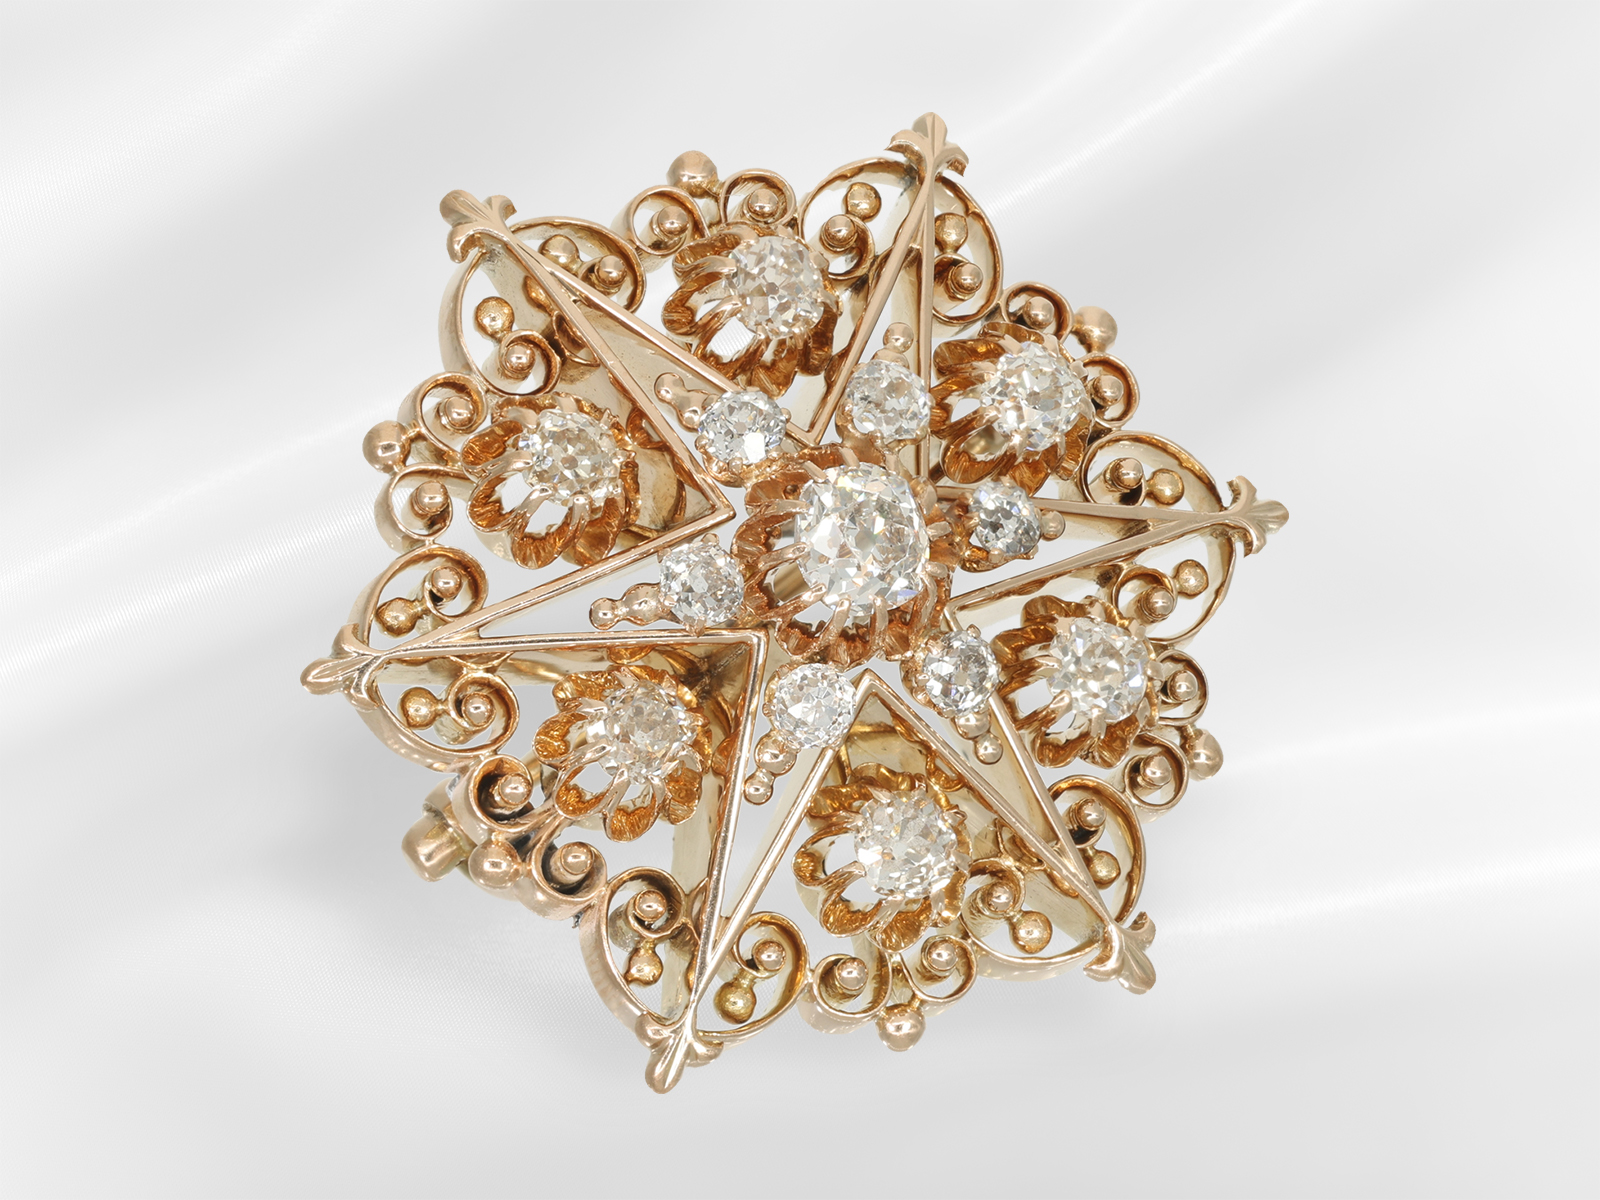 Brooch/pin: valuable old and handcrafted brooch with beautiful diamond setting, 14K gold - Image 2 of 4